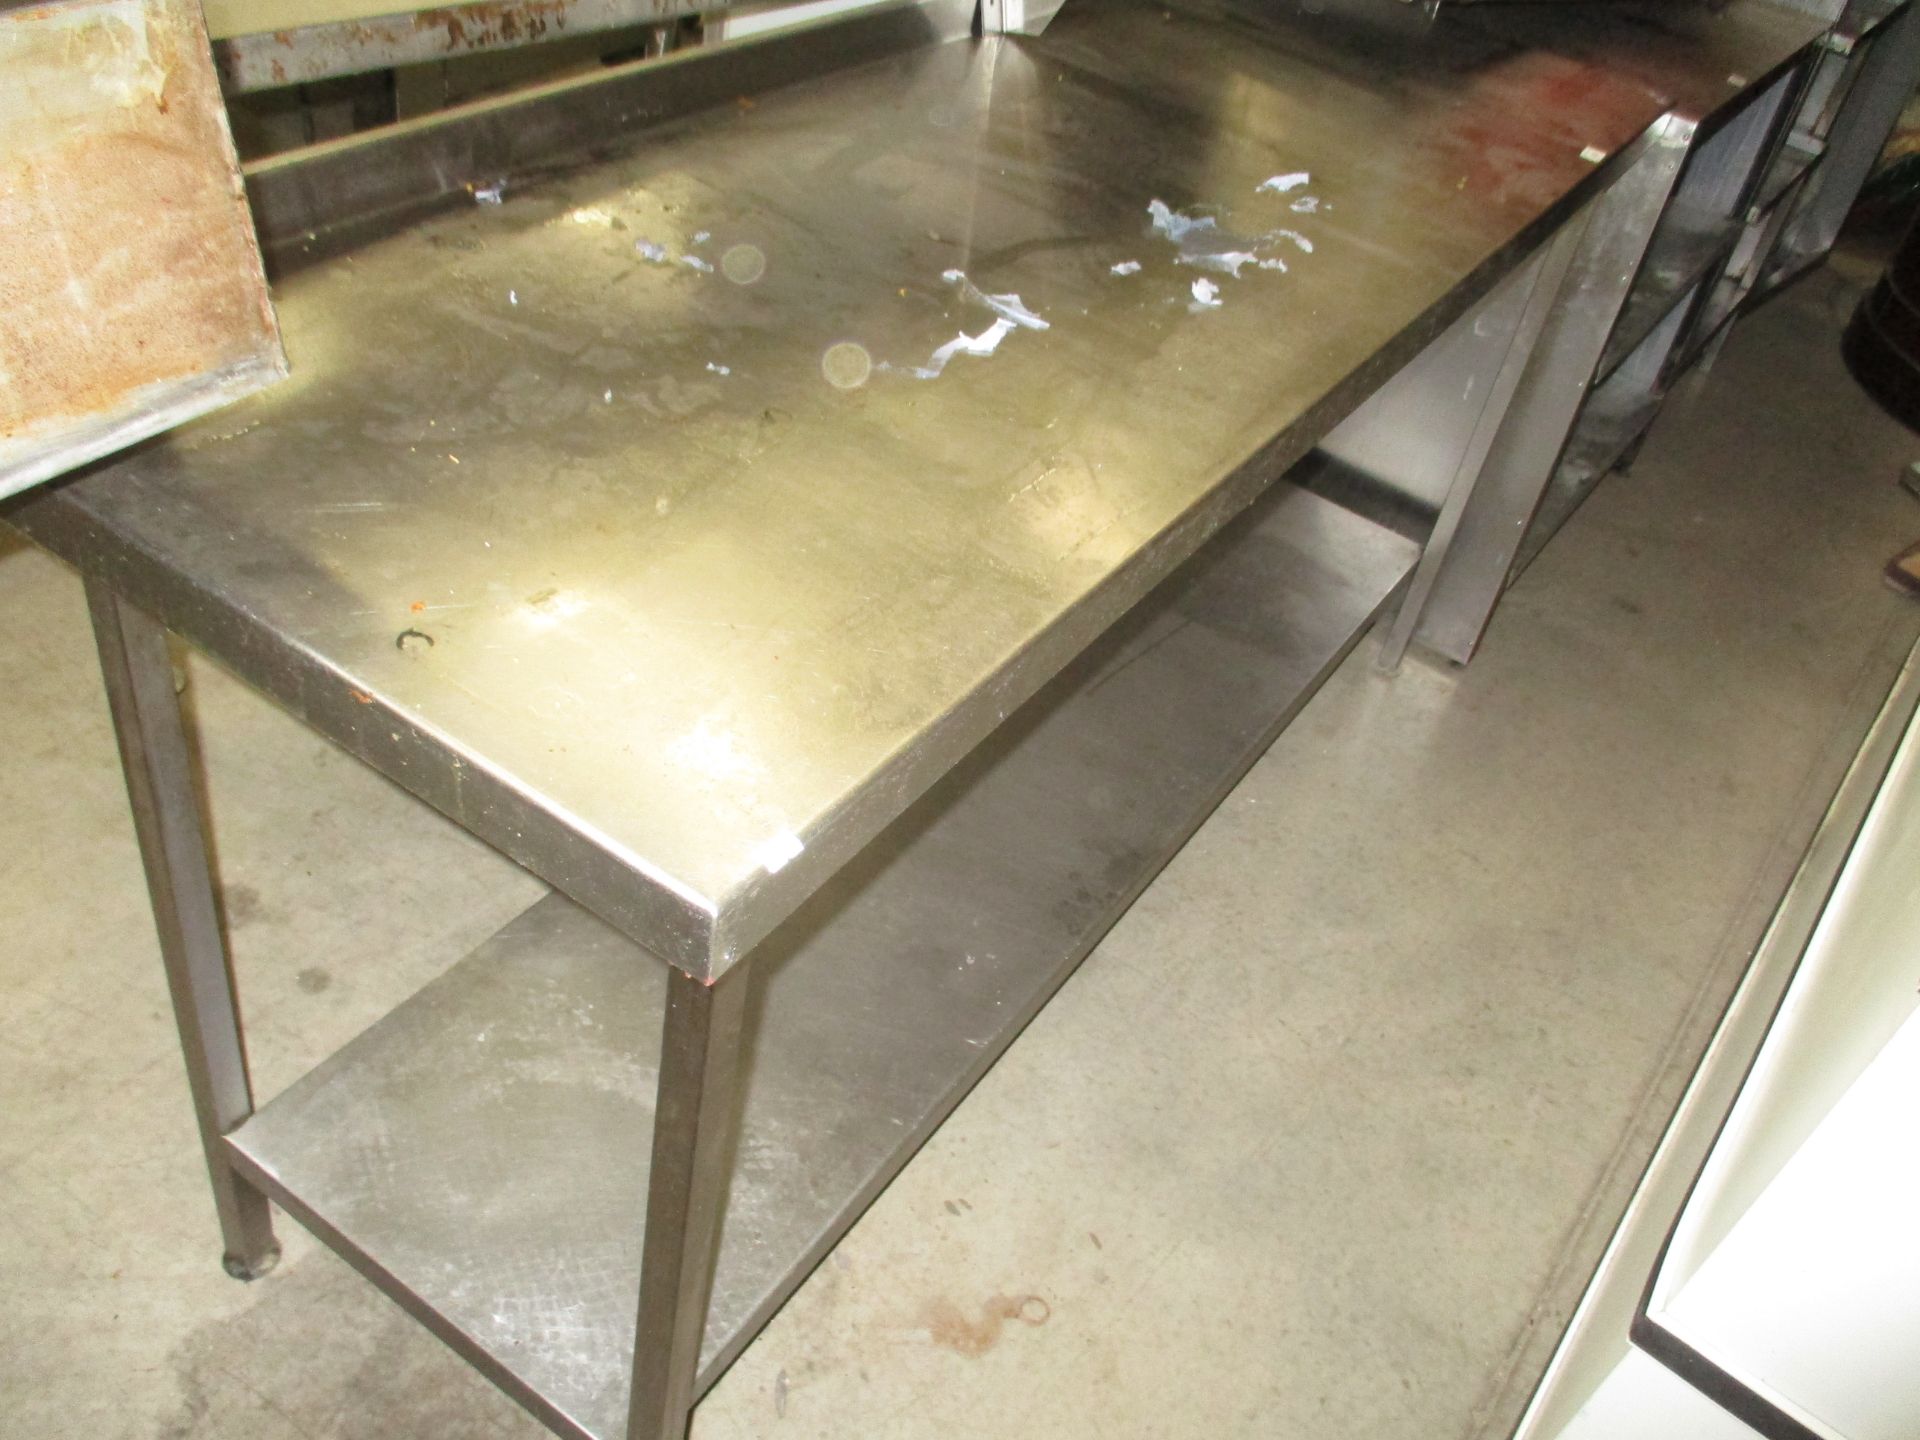 A stainless steel two shelf preparation table 60 x 180cm